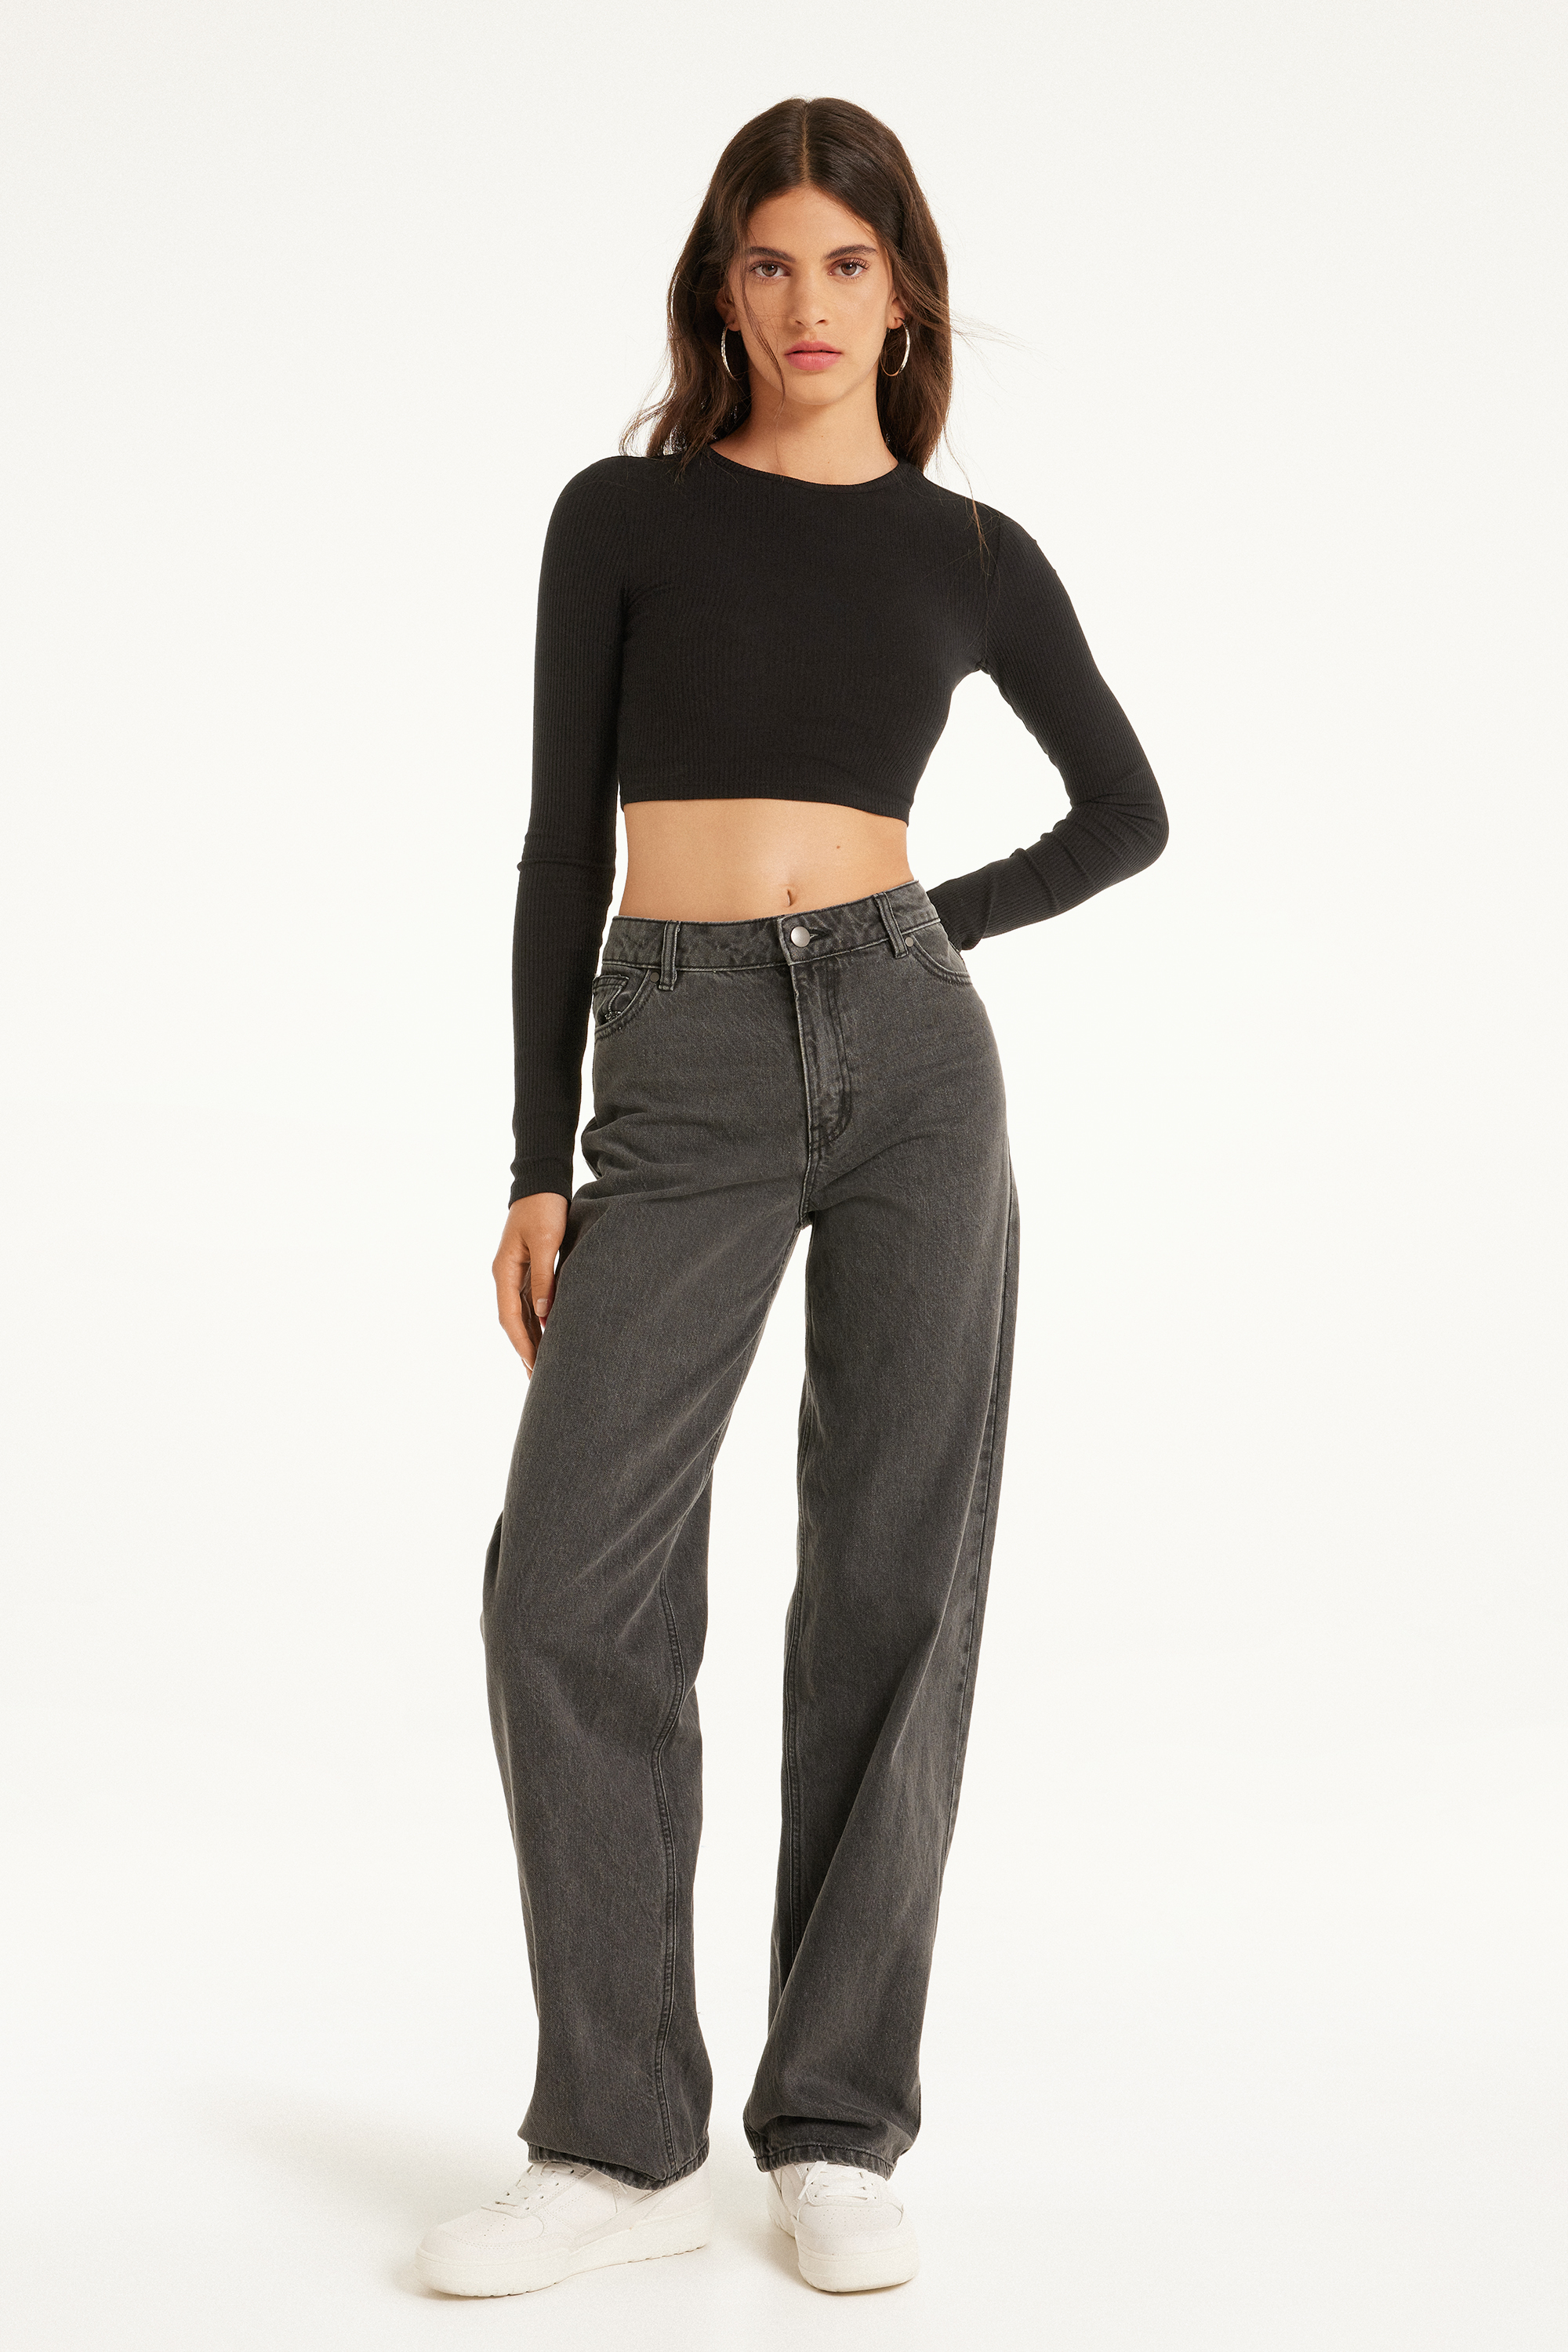 Ribbed Long-Sleeved Crew-Neck Crop Top